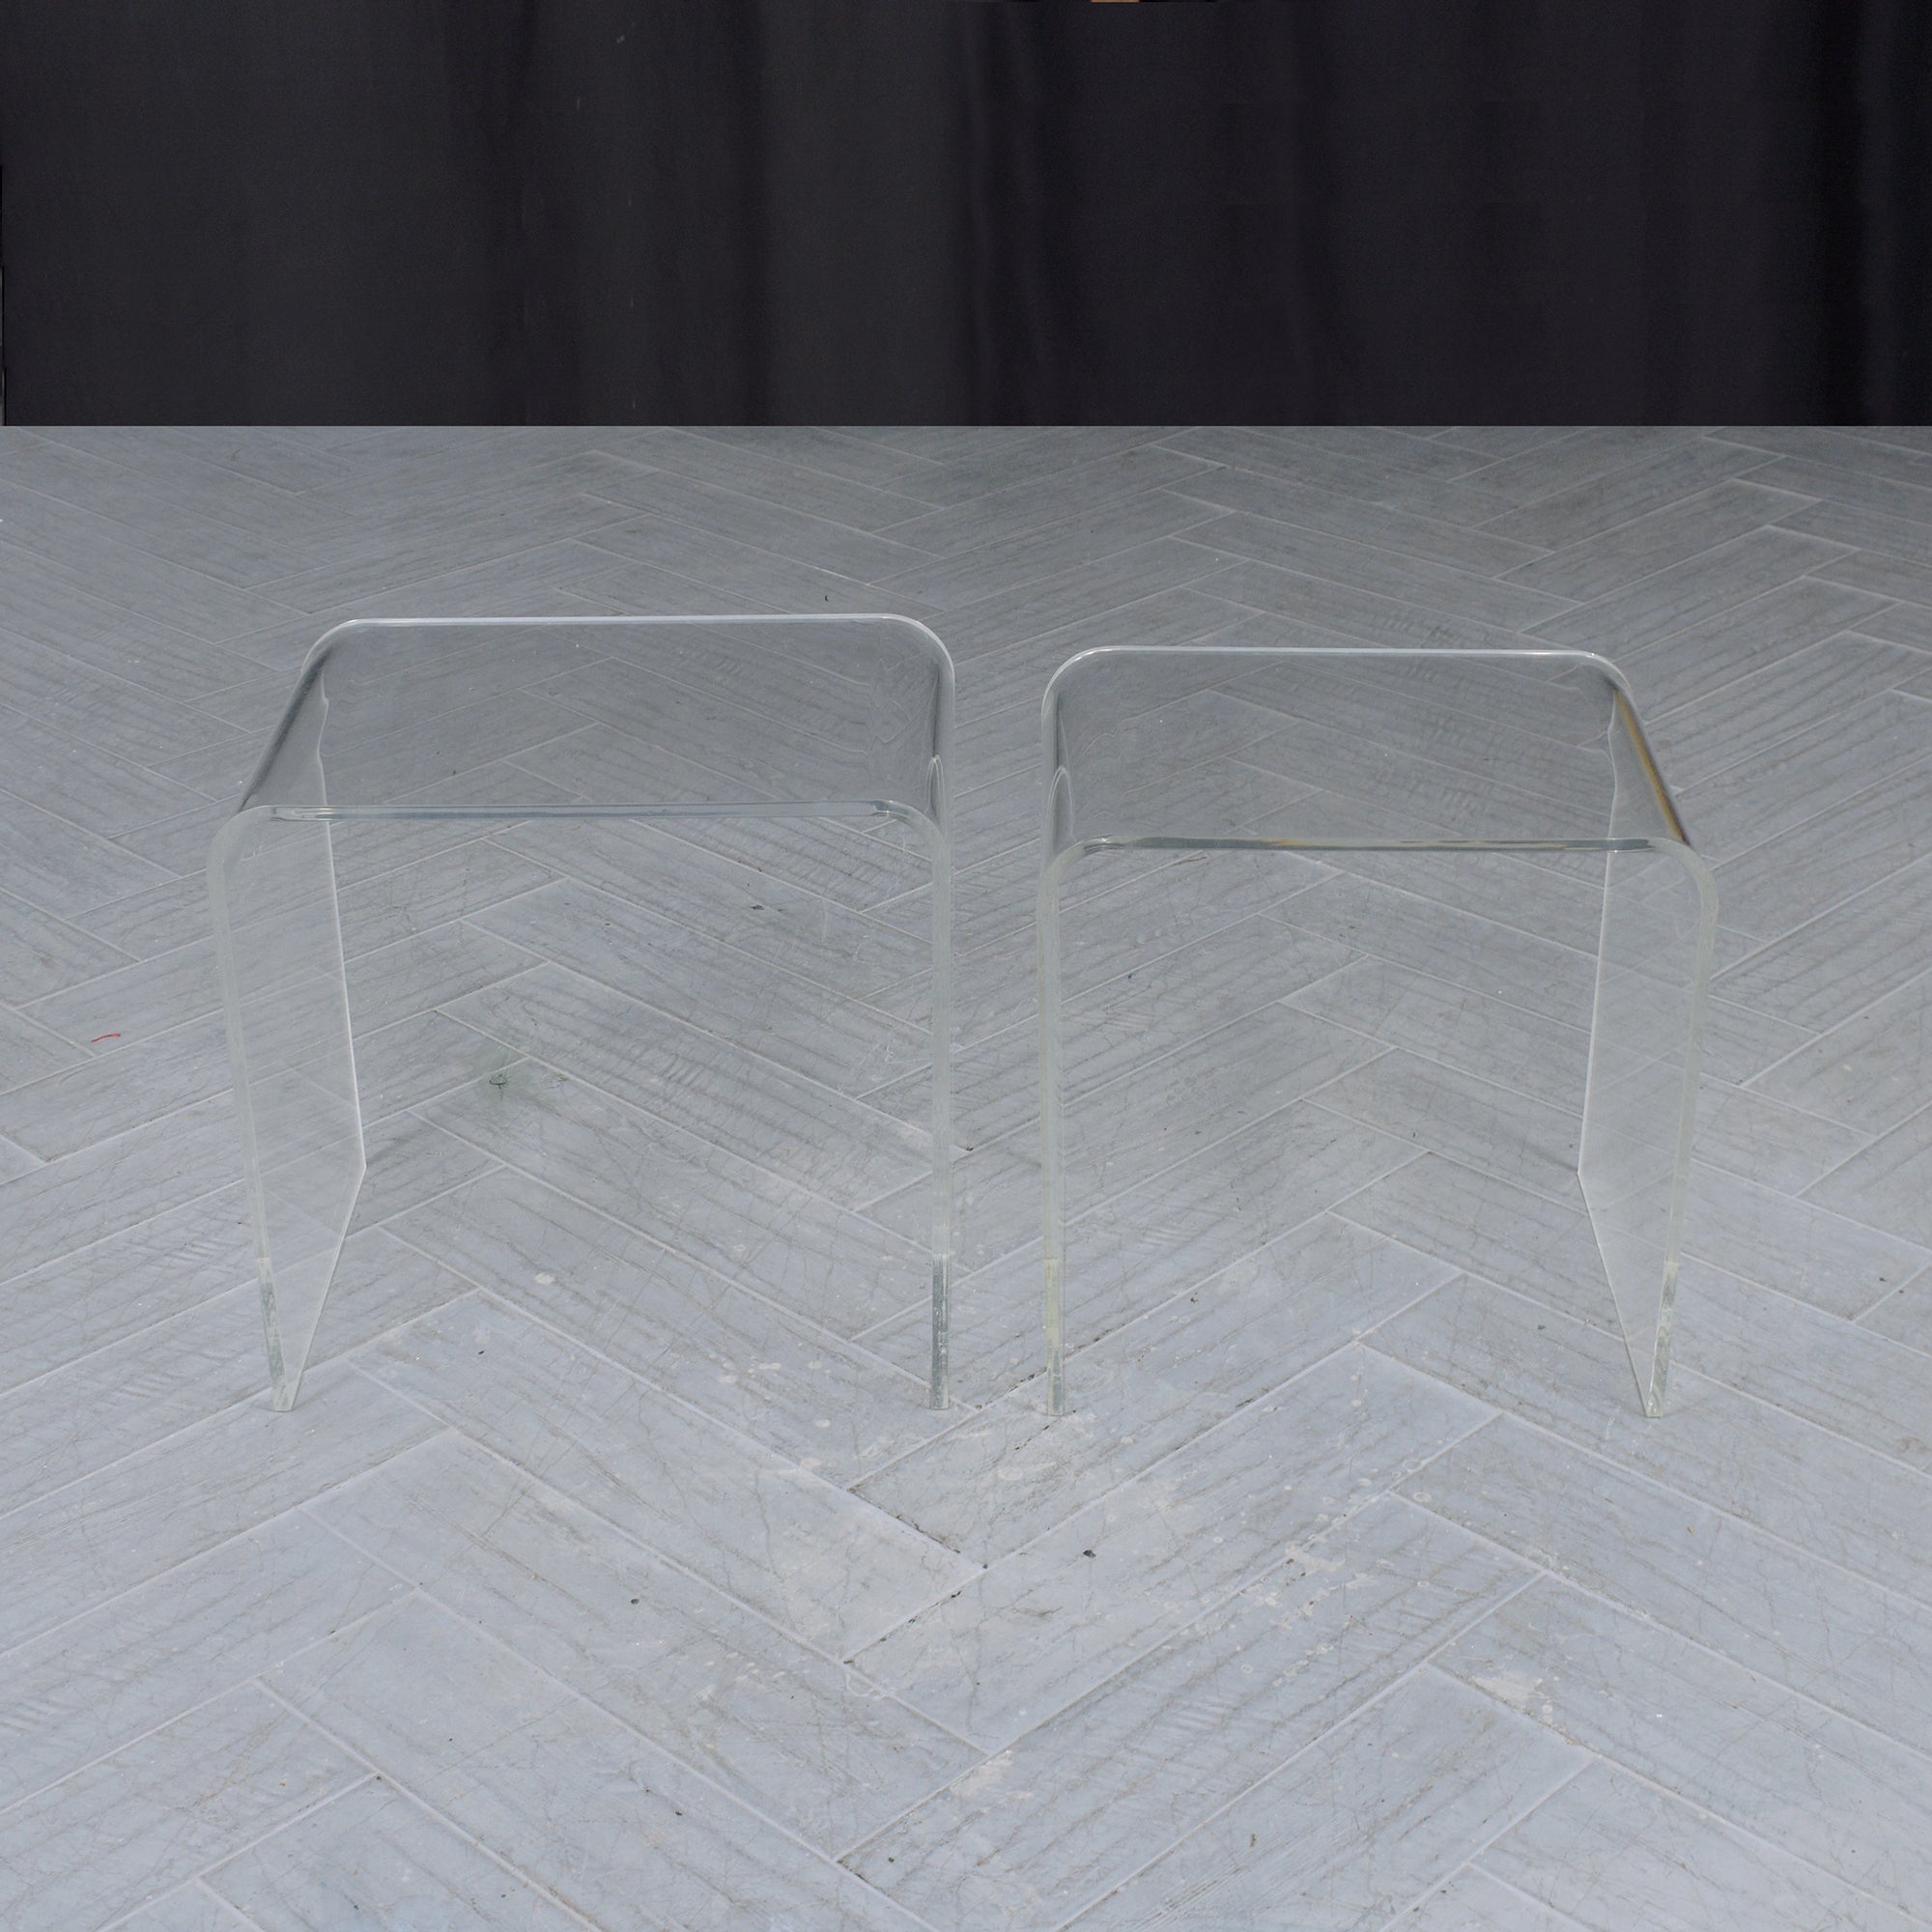 Presenting our stunning mid-century modern nesting tables, carefully crafted from lucite and maintained in great condition. Newly cleaned and polished by our professional in-house team of craftsmen, this pair of vintage side tables showcase a